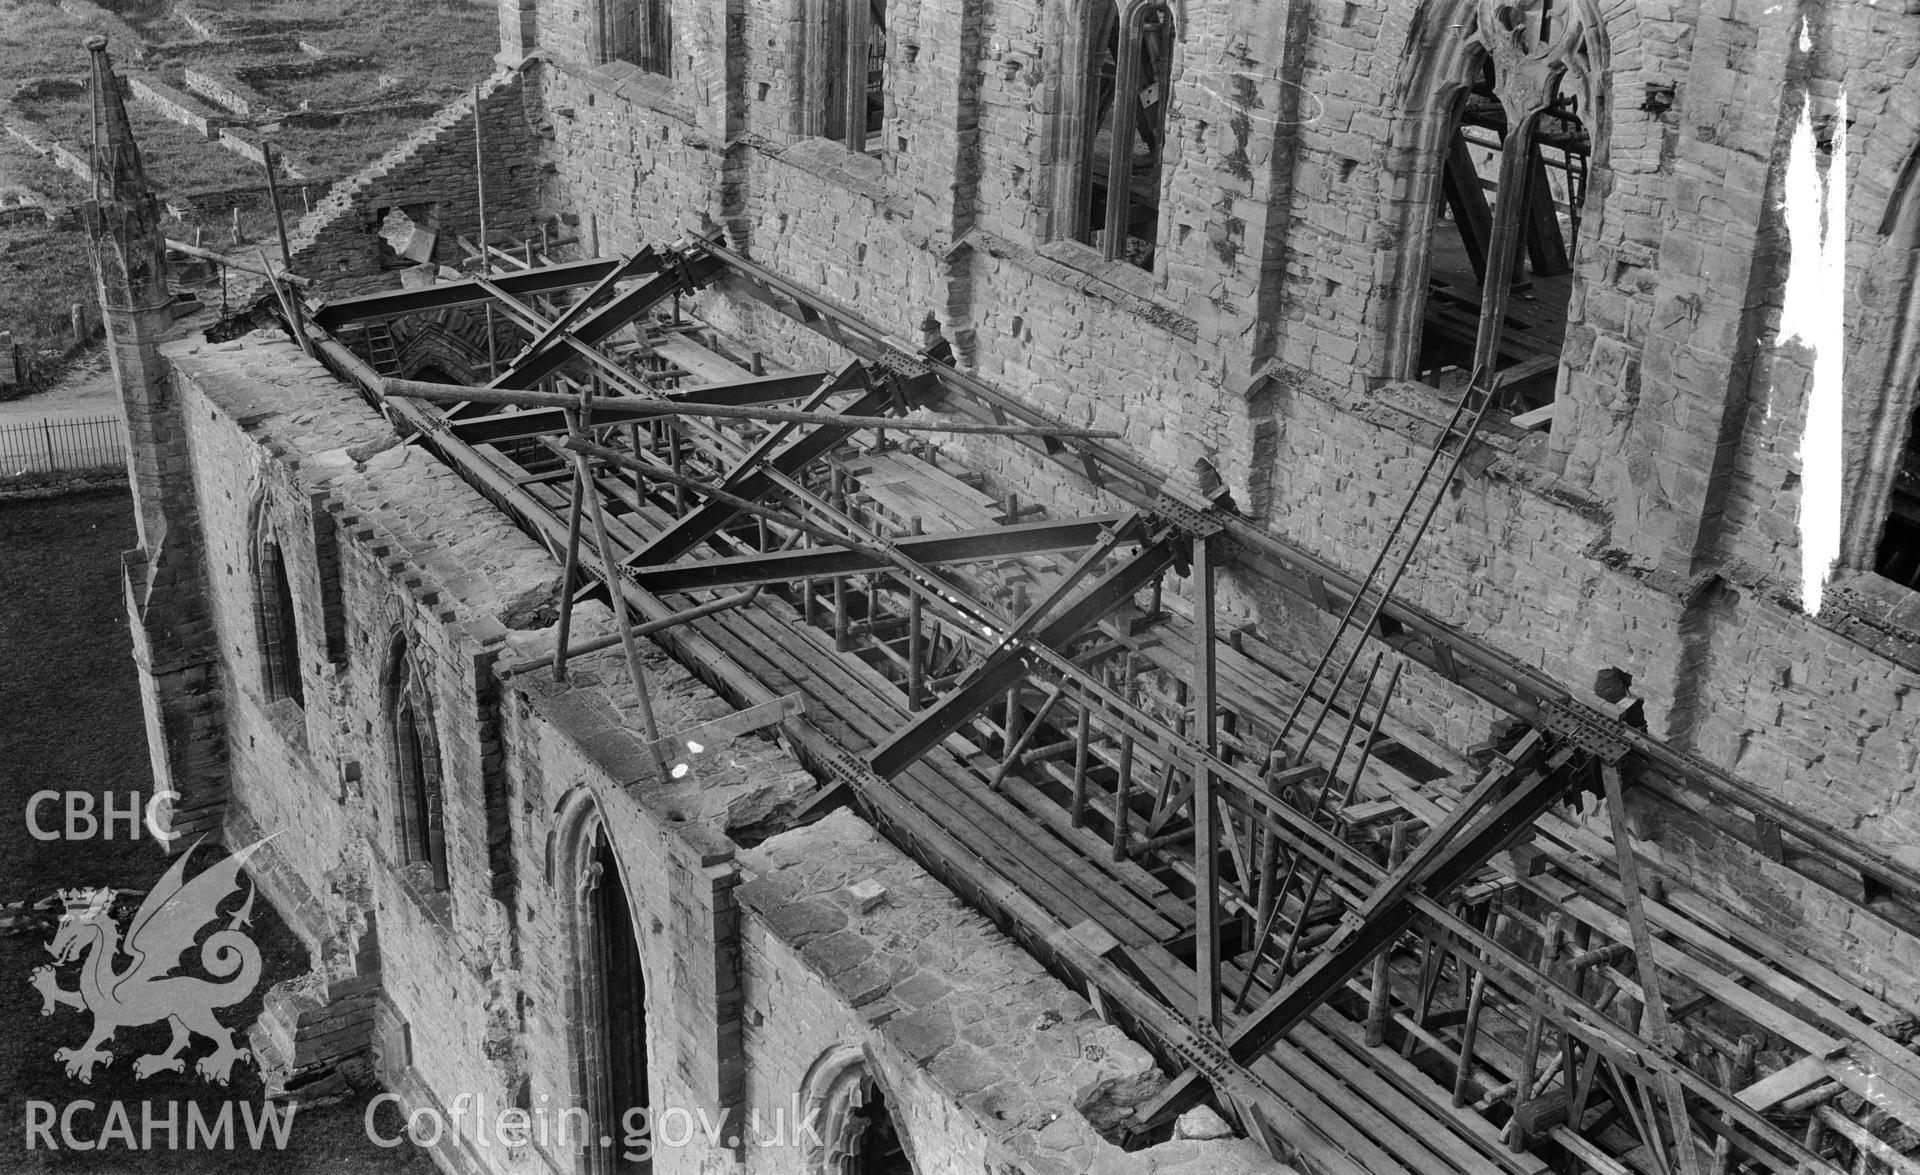 Photo showing reconstruction work at Tintern Abbey.